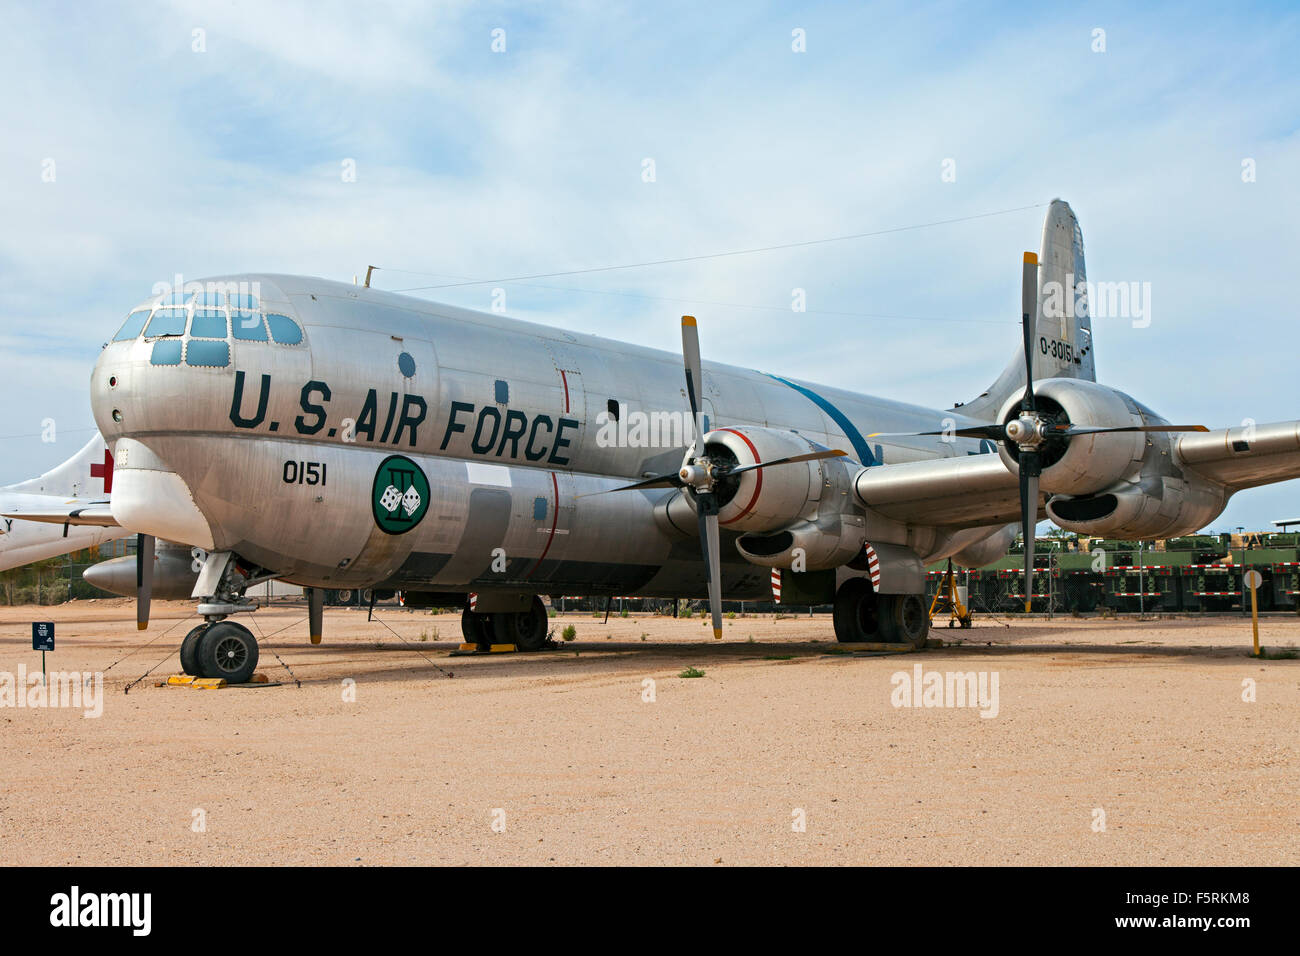 Boeing KC-97G Stratofreighter on display at the Pima Air Museum in Tucson, Arizona. Stock Photo